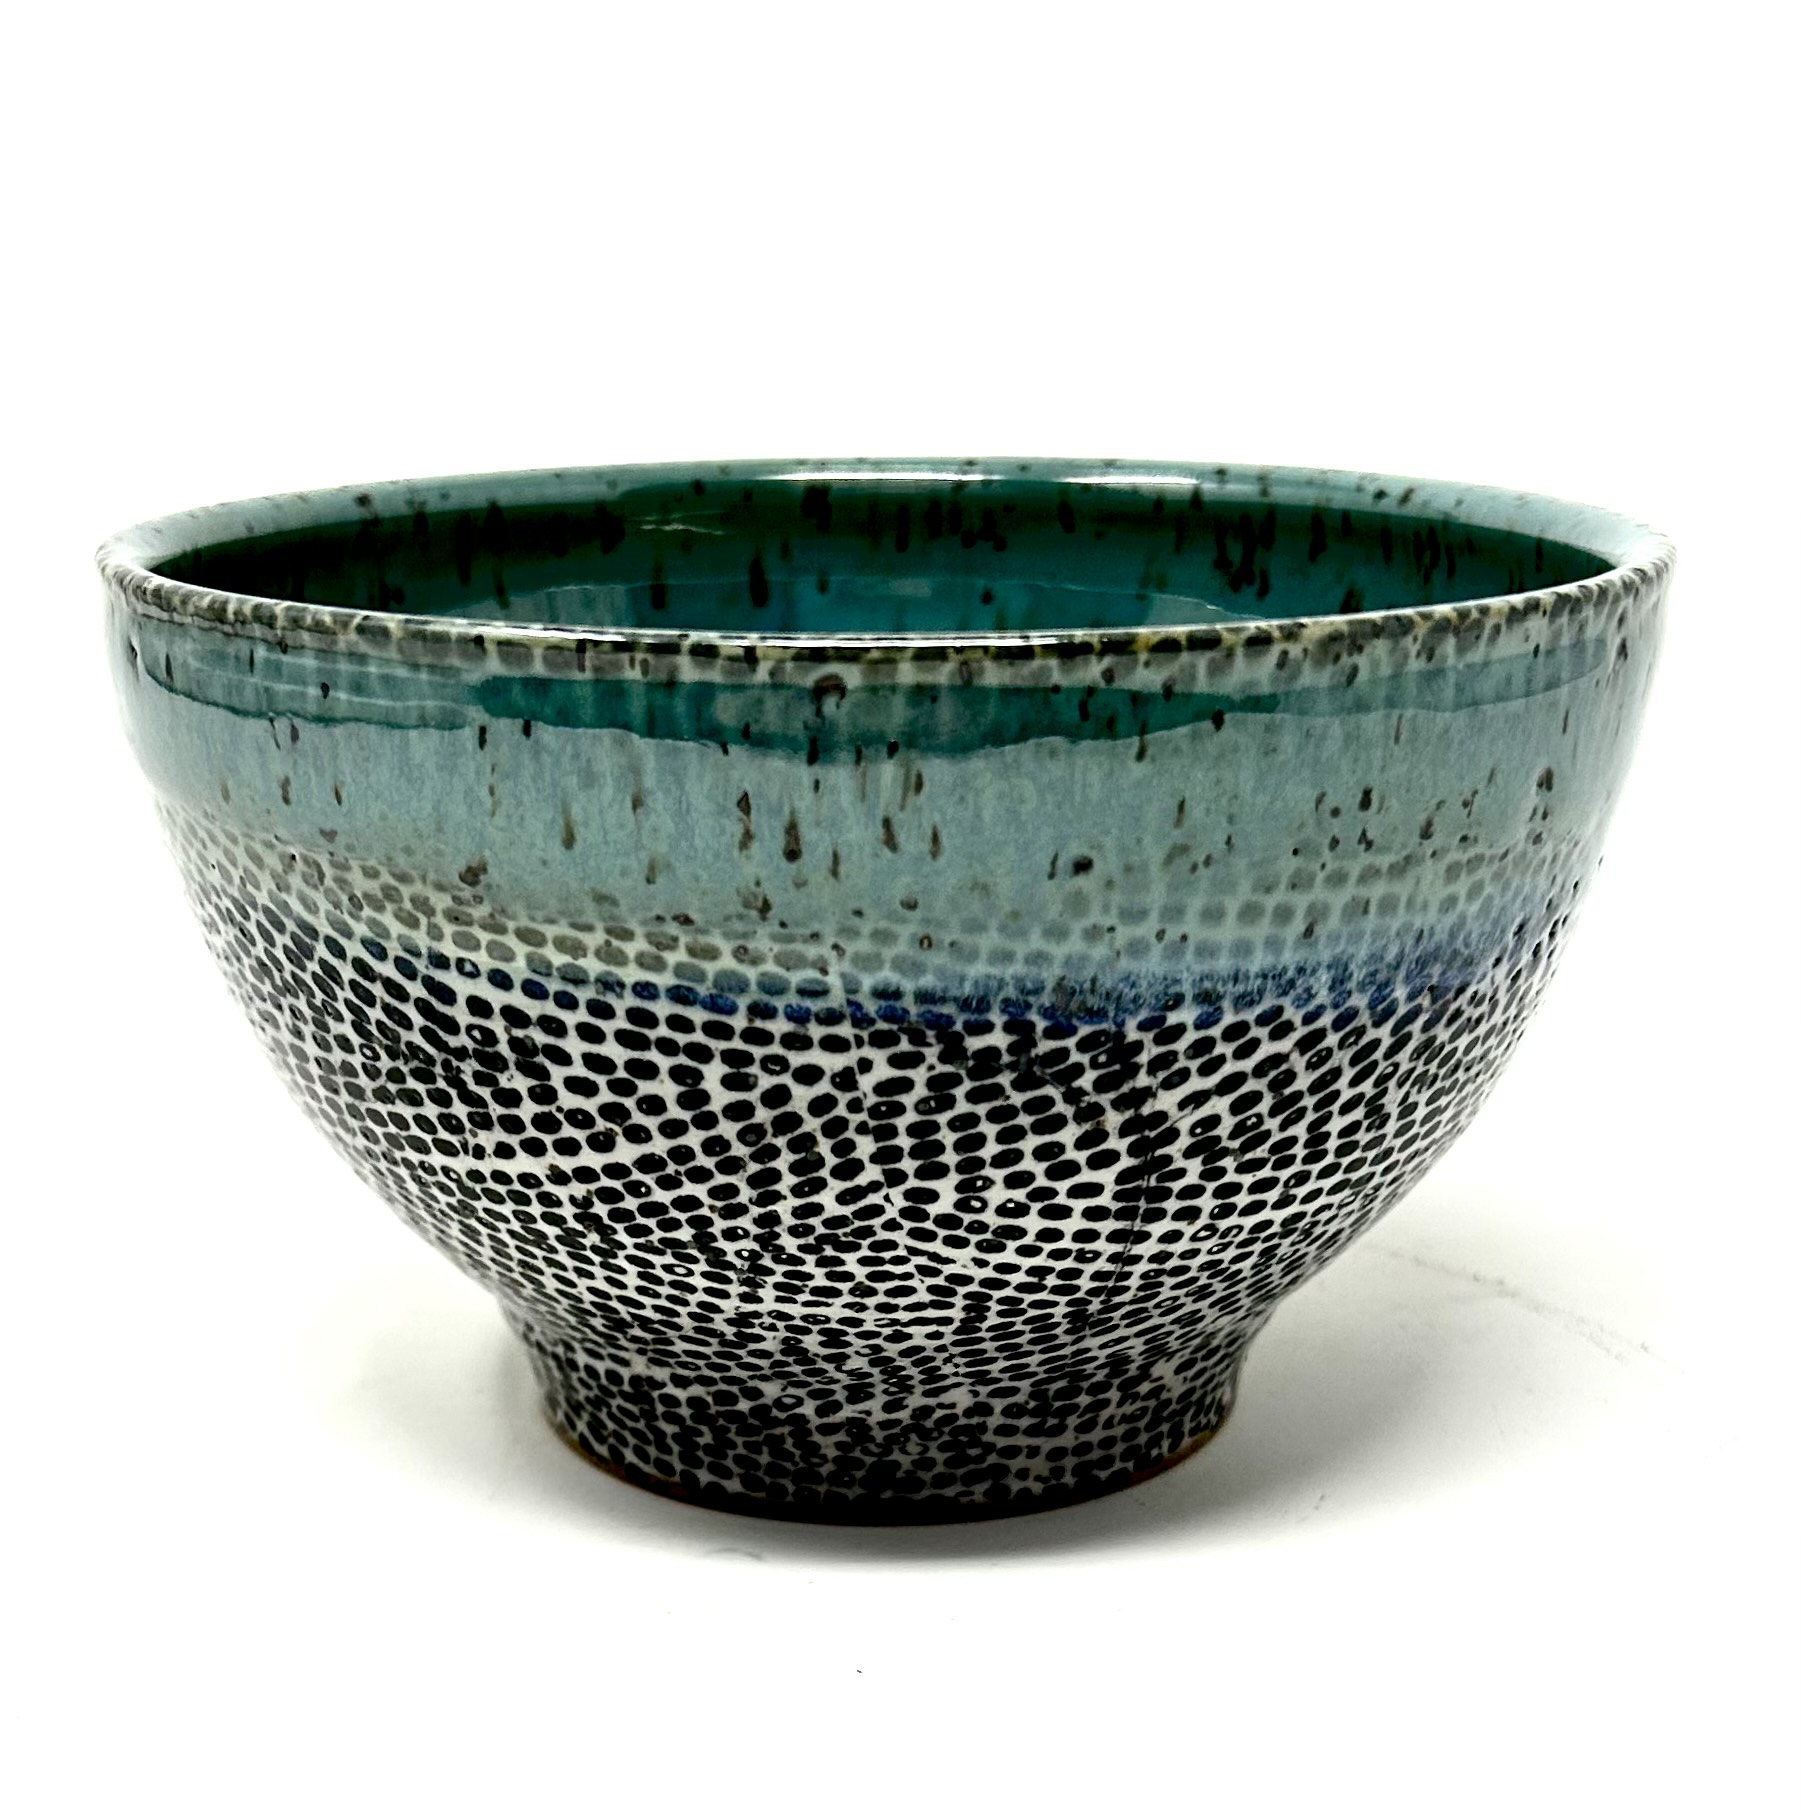 The Zumba Ramen Bowl 2 is a stoneware piece that captivates with a gradient of textures and hues. The speckled pattern at the base, reminiscent of intricate dance steps, rises to meet a serene blue glaze, which then gives way to a lush, green interior.